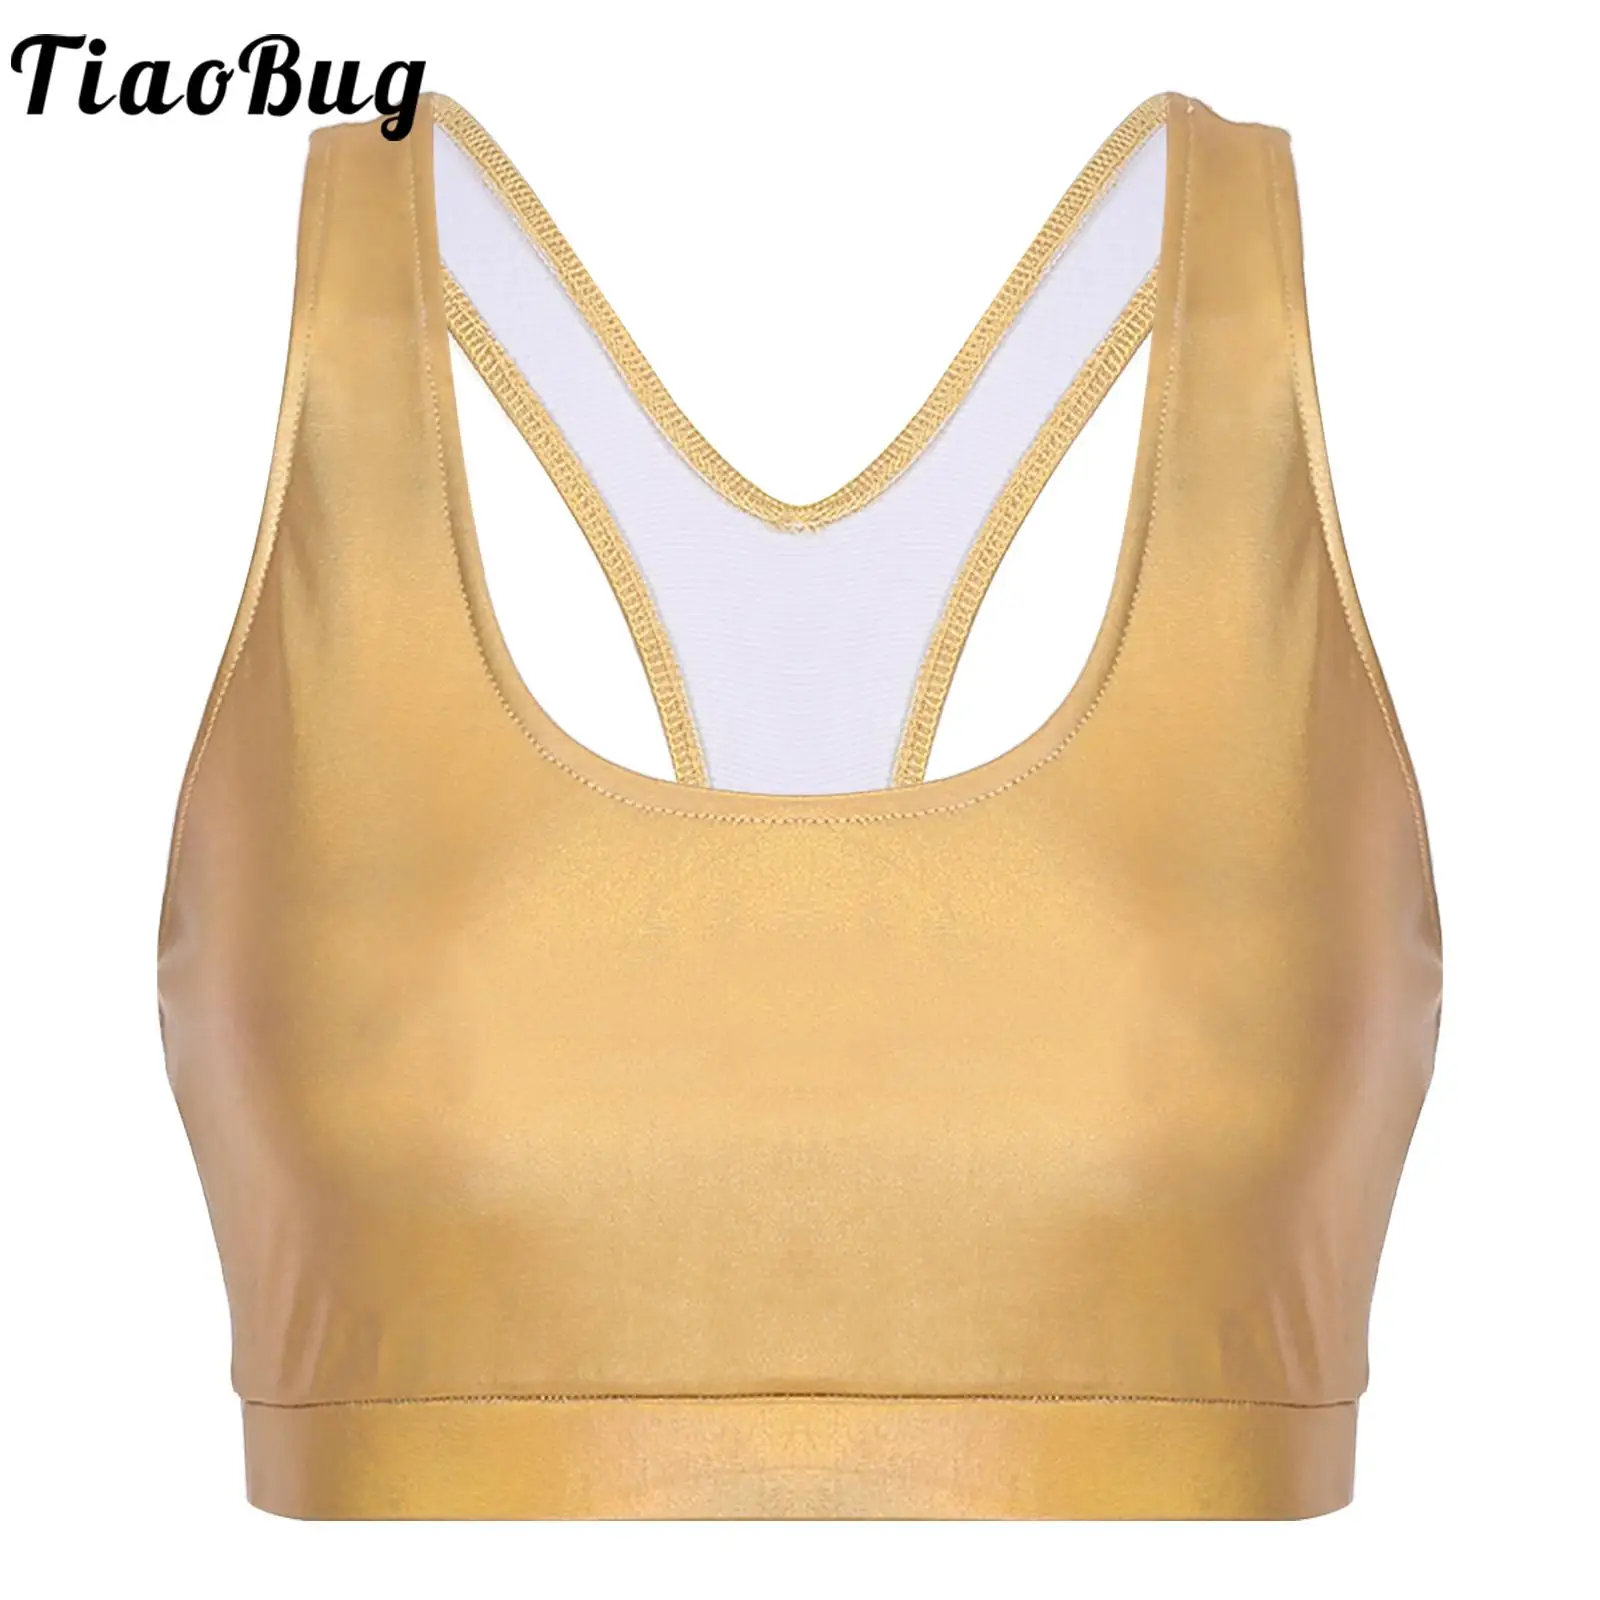 

Tiaobug Womens Metallic Shiny U Neck Sleeveless Crop Tops Strappy Hollow Out Cutout Back Tanks Sports Gym Yoga Hang Out Vests